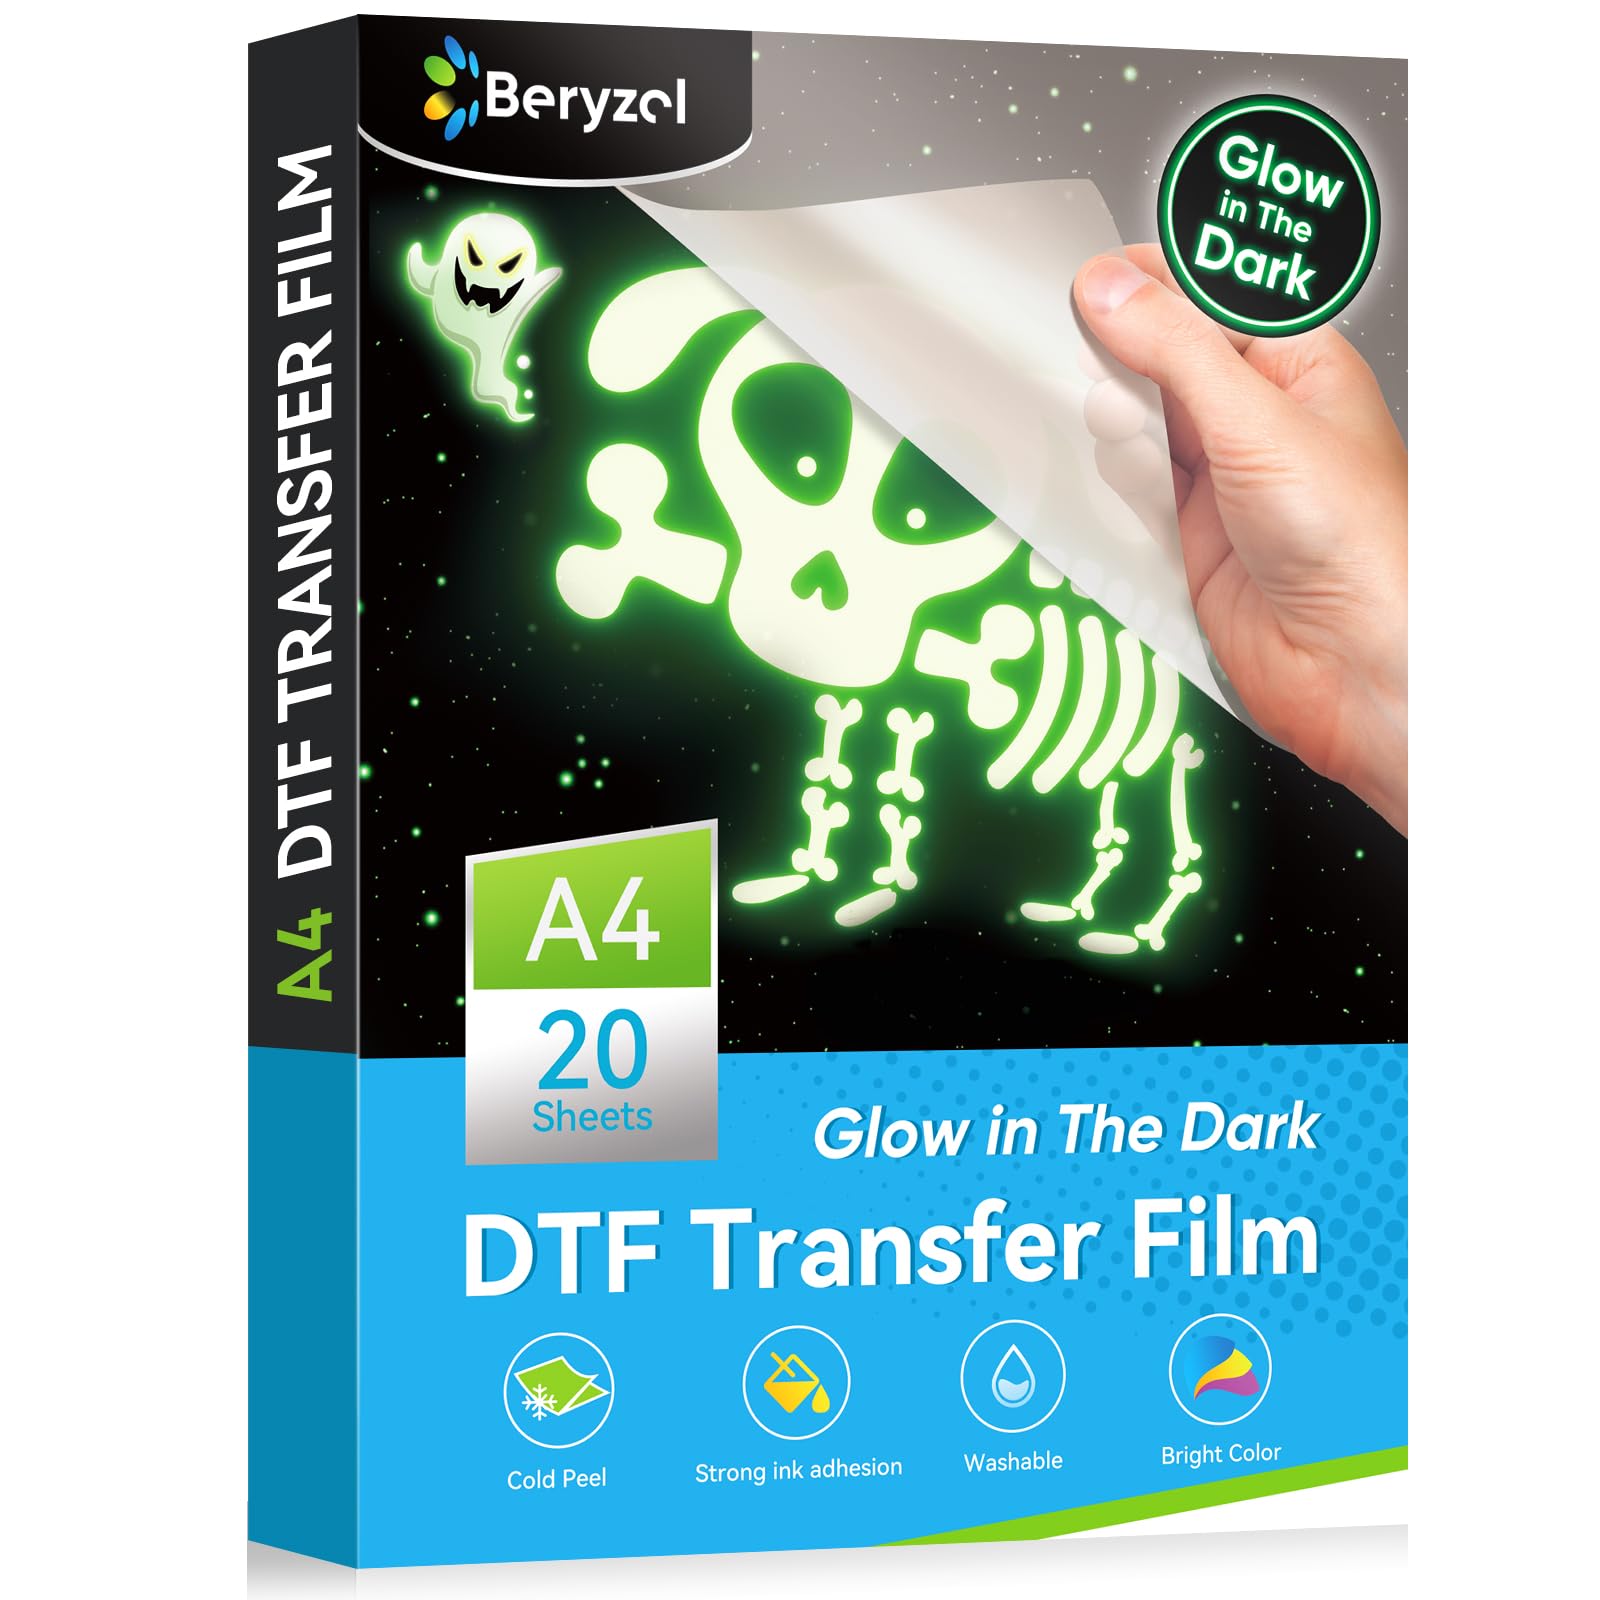 Beryzol Glow in The Dark Film DTF Luminous Transfer Film: A4 20 Sheets (8.3" x 11.7") is Transfer Paper Coated with Phosphor for DIY Direct Printing on T-Shirts and Textiles